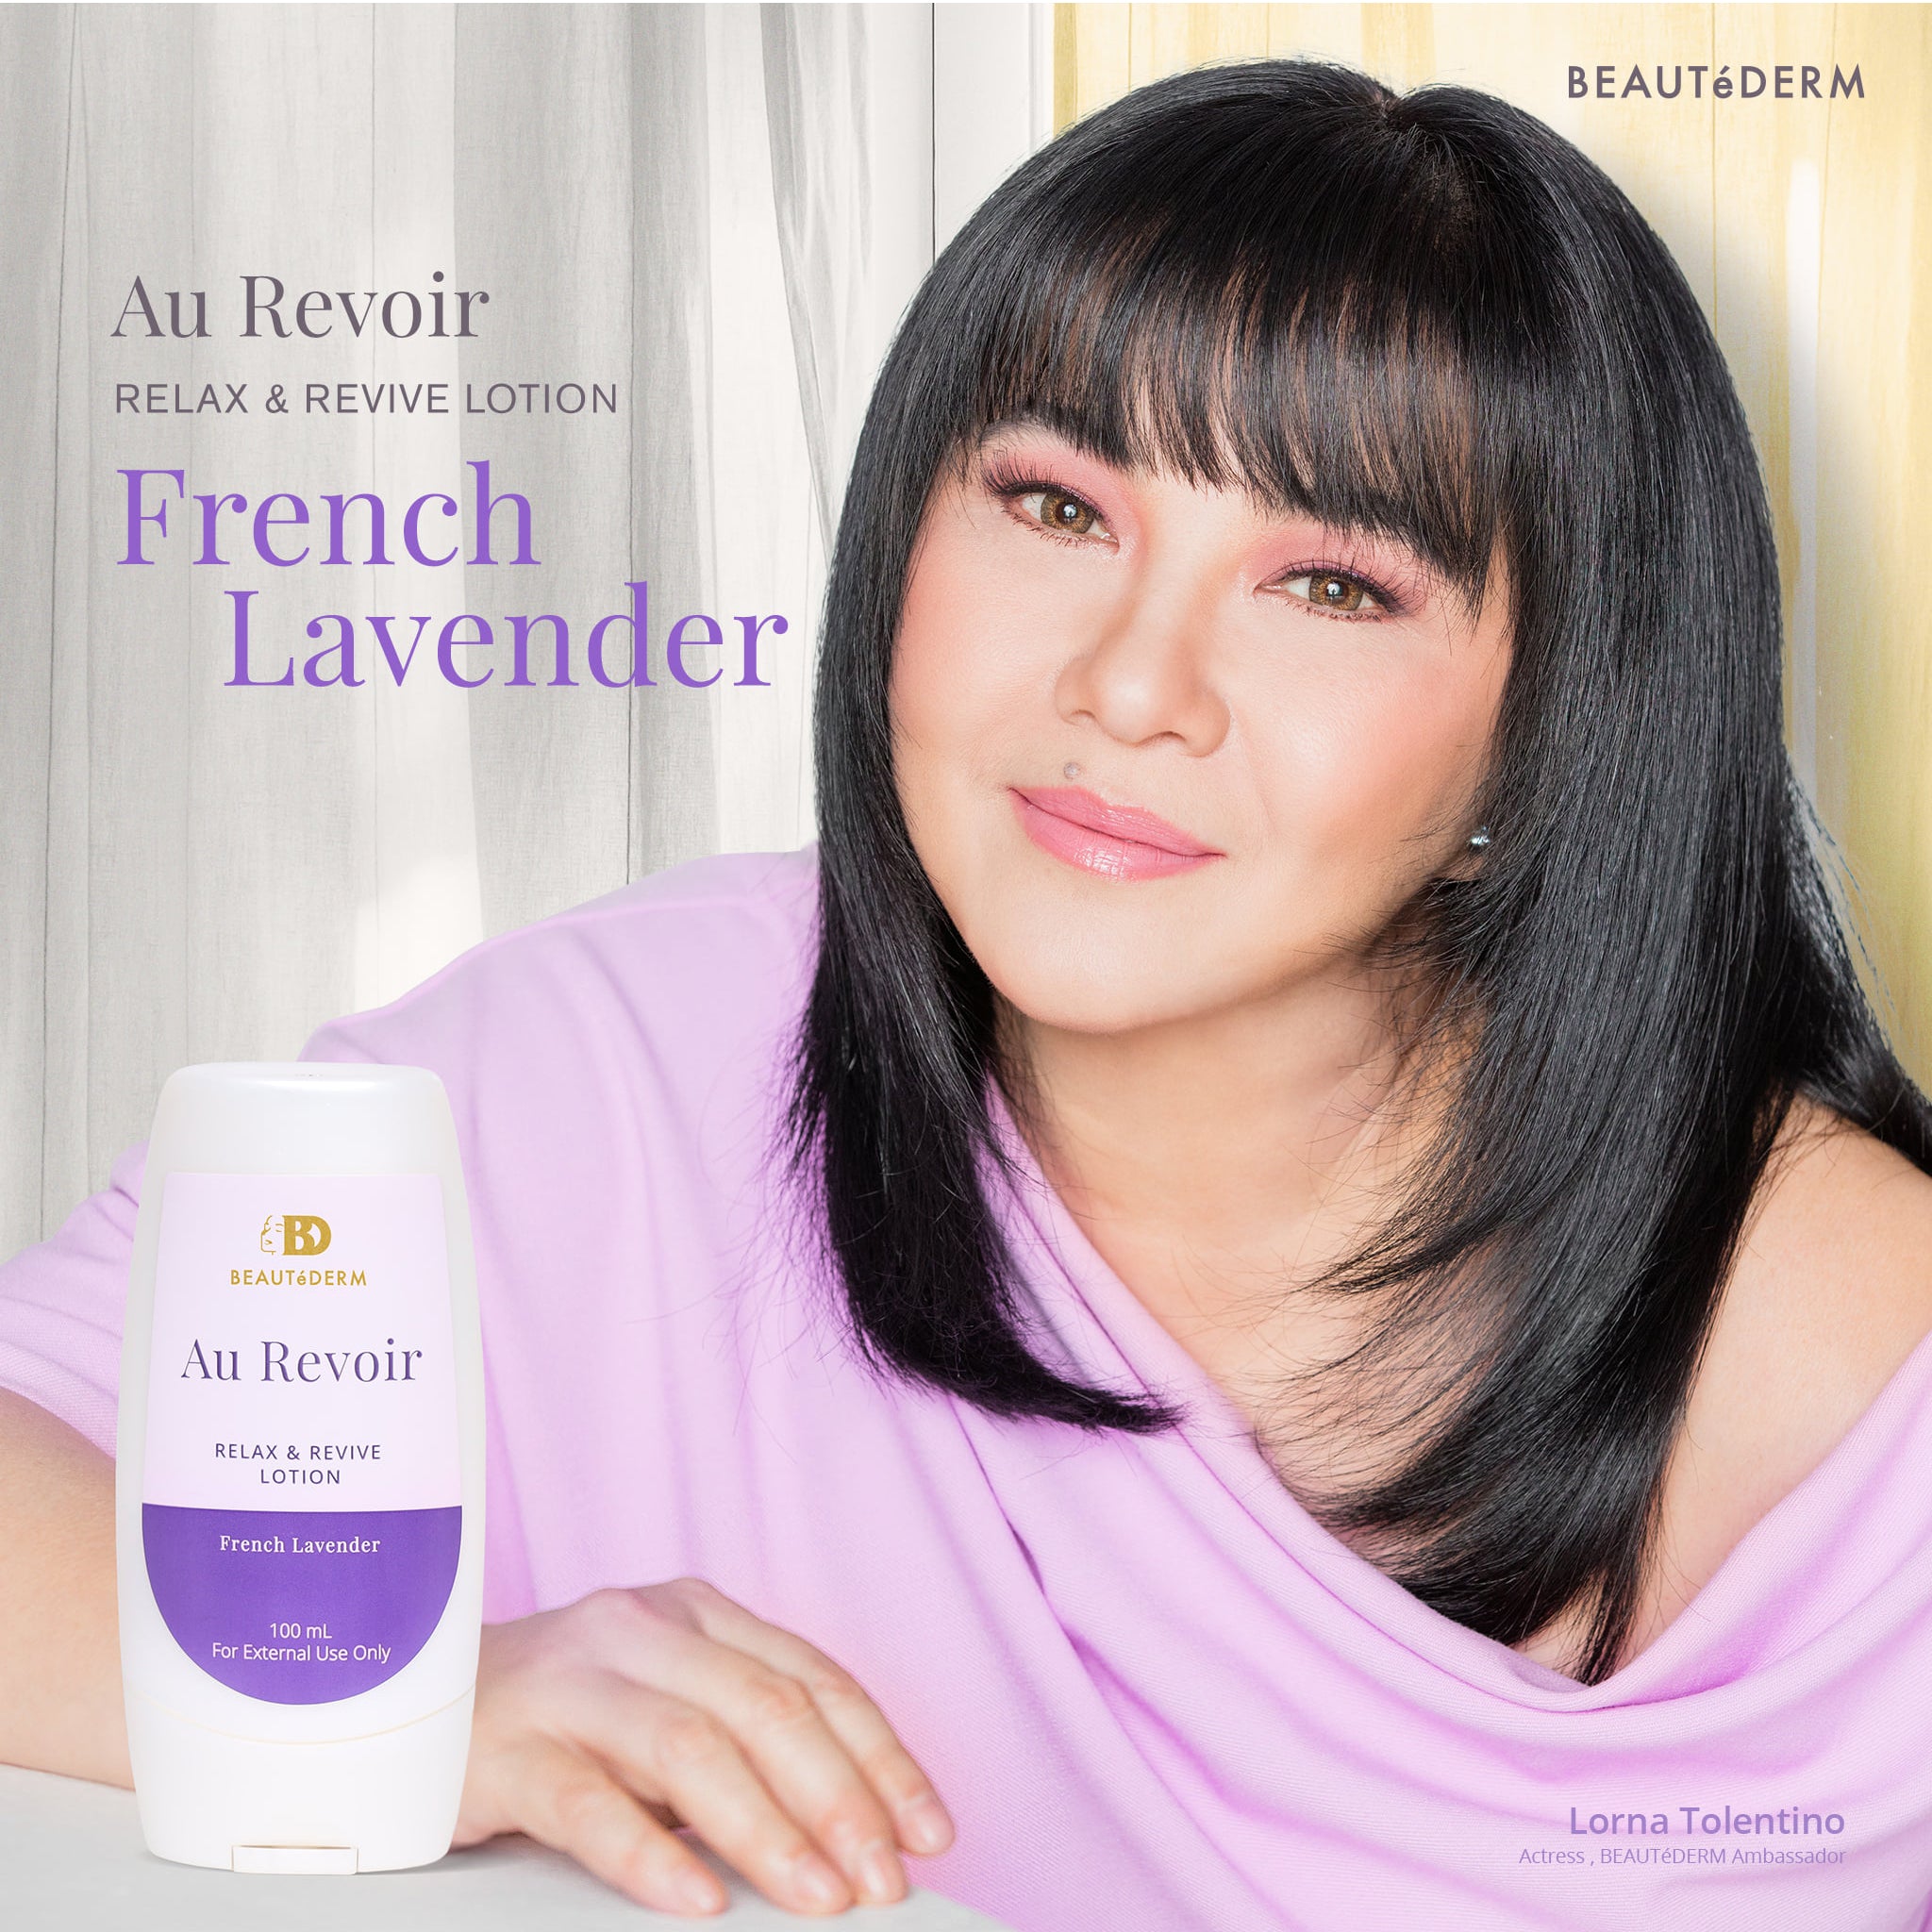 Au Revoir Relax & Revive Lotion, French Lavender, 100ml, by Beautederm, with Lorna Tolentino (Beautederm Ambassador)